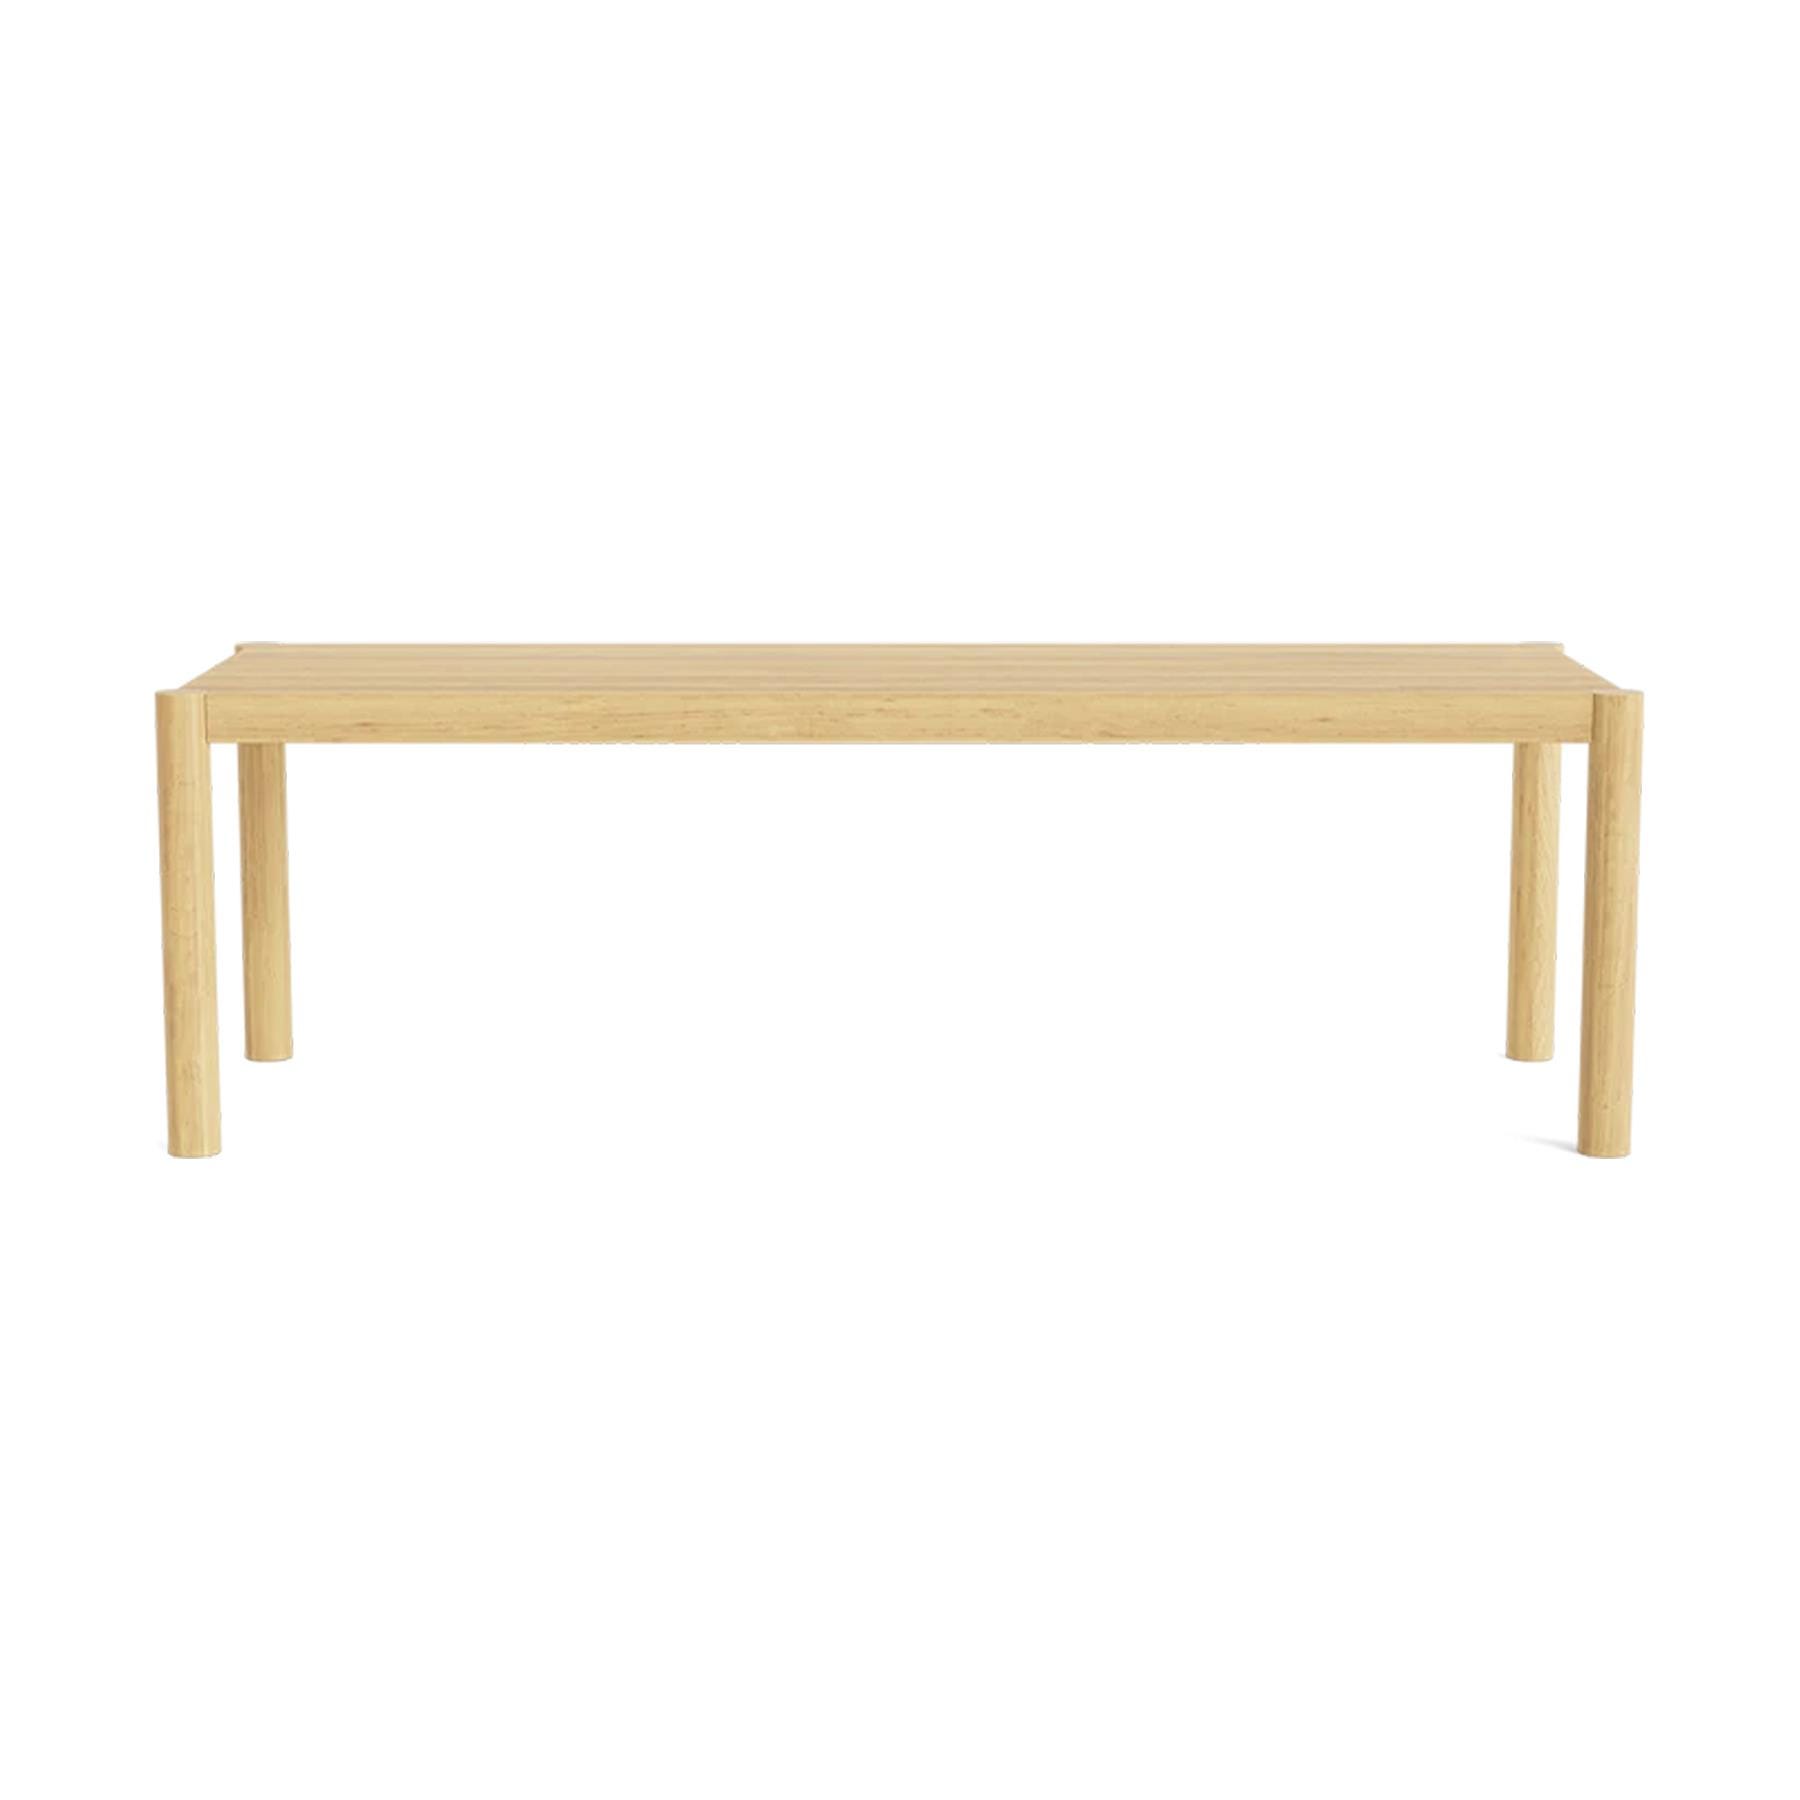 Make Nordic Tammi Coffee Table Rectangle Height 38cm Oak Natural Oil Light Wood Designer Furniture From Holloways Of Ludlow